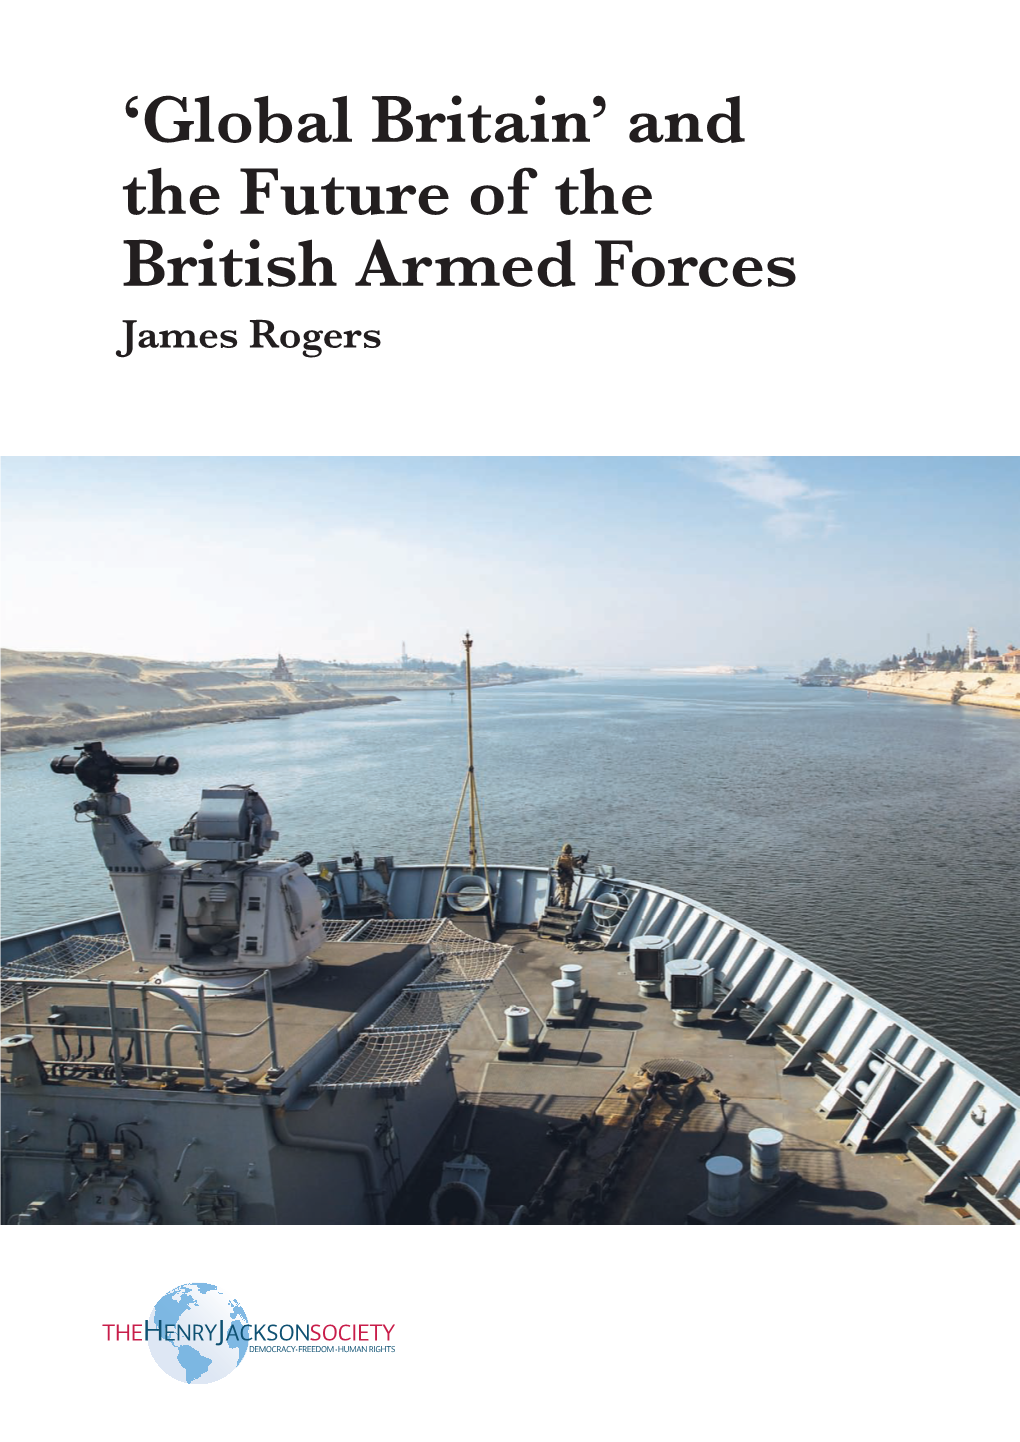 HJS ''Global Britain' and the Future of the British Armed Force